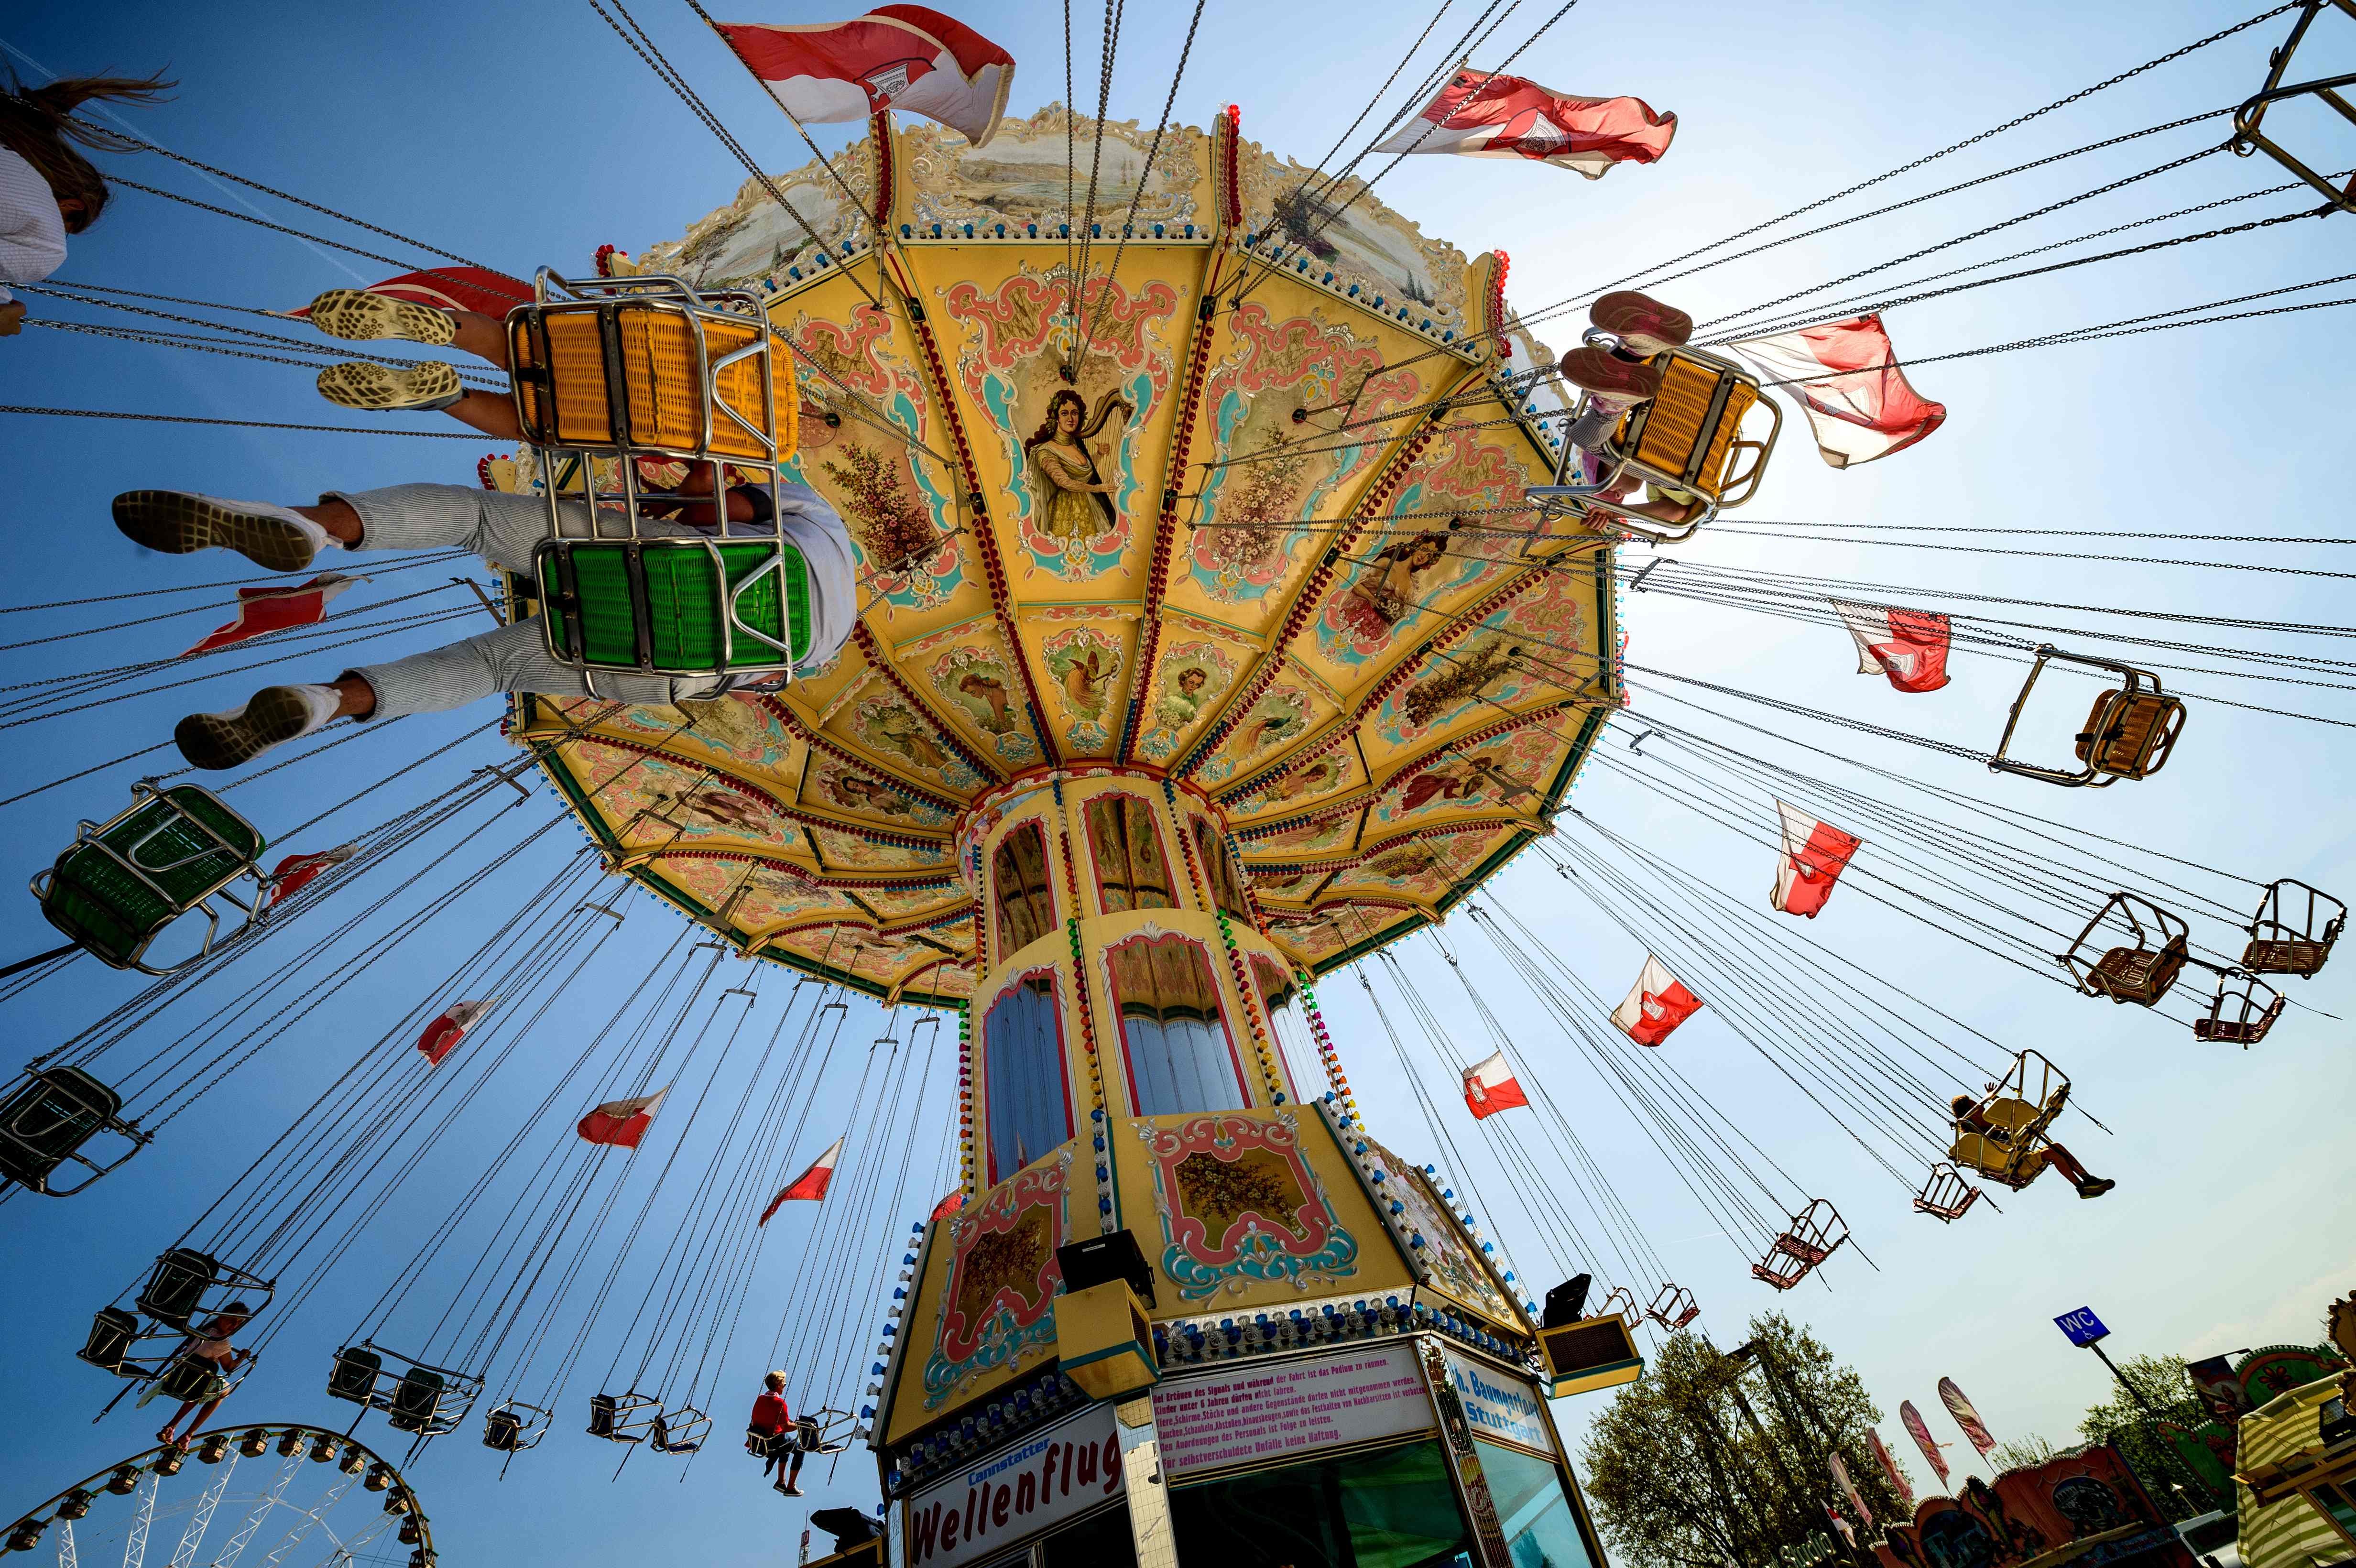 People ride on a chair swing at the fairgrounds in Stuttgart, Germany on April 21, 2018.